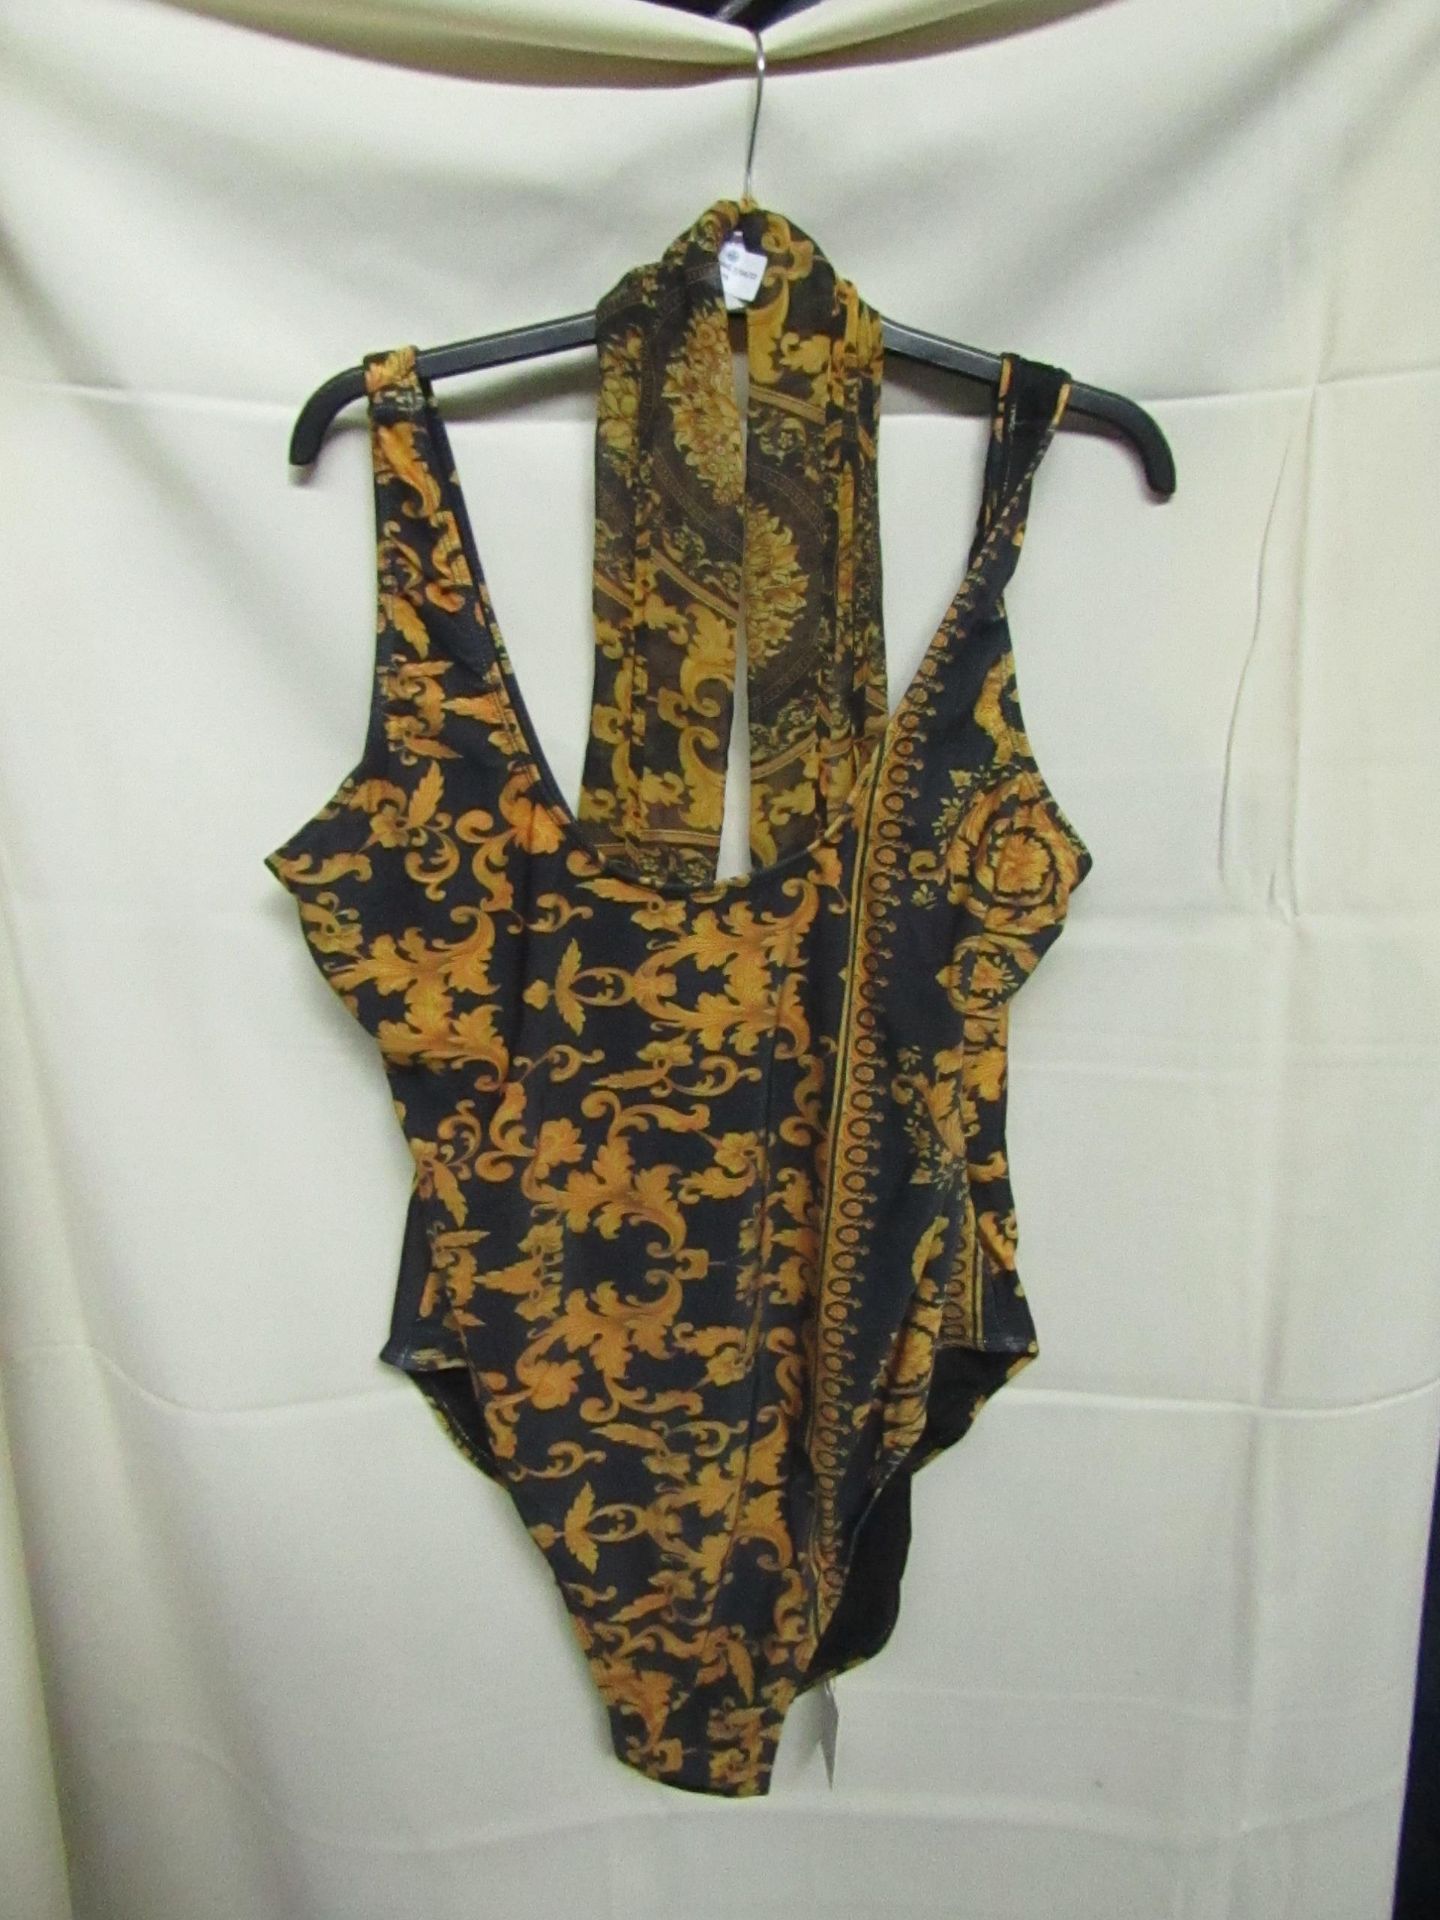 boo Hoo Ladies Swimming costume and hair tie up, size 24, sample